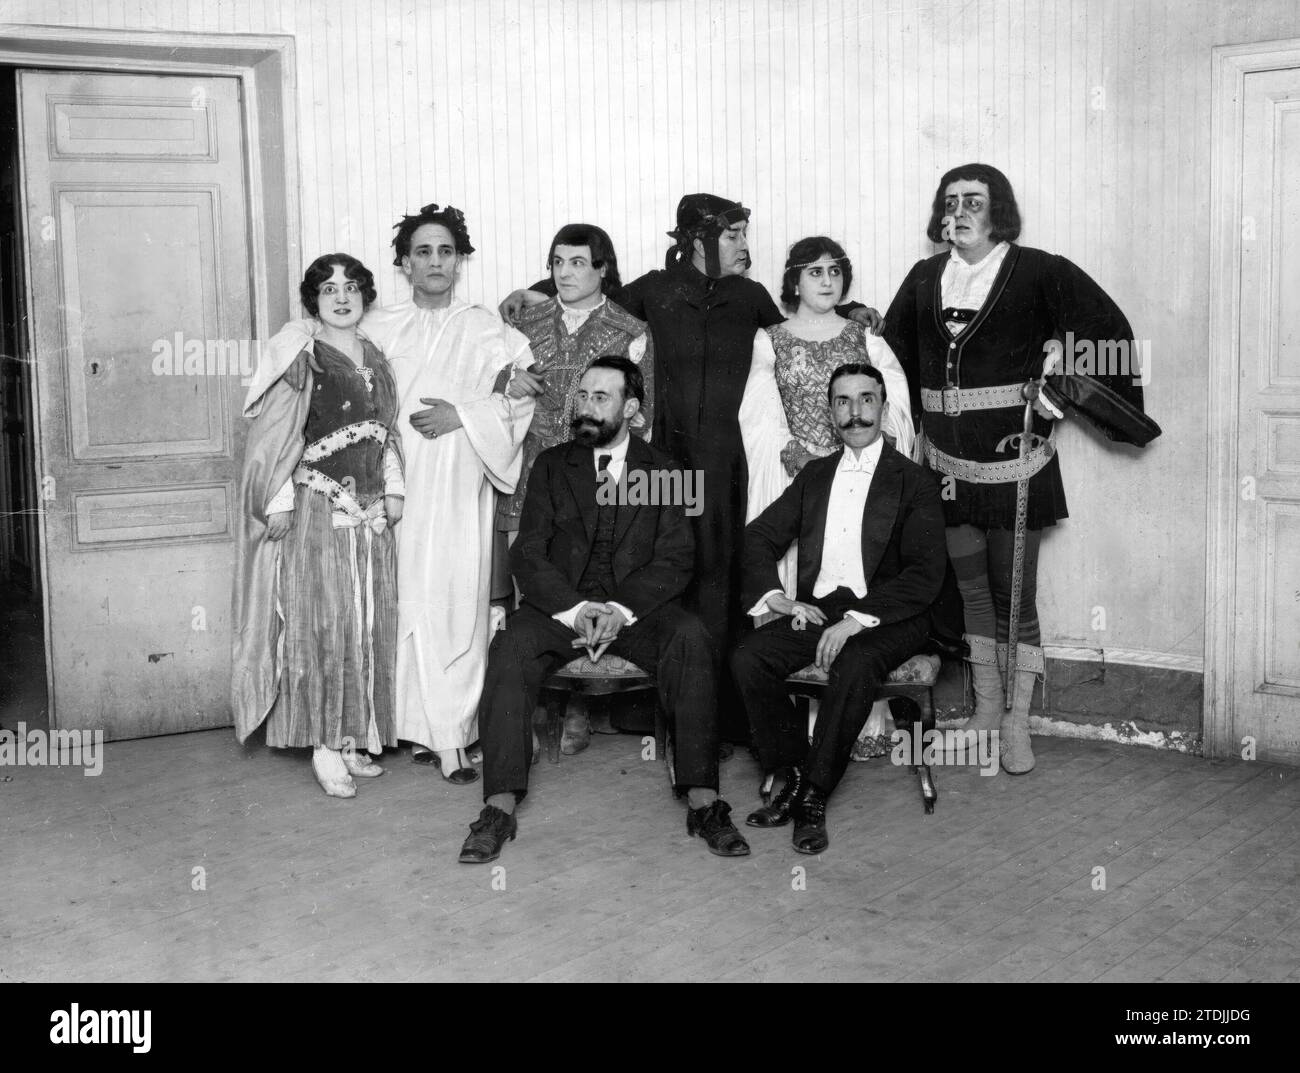 04/30/1915. Premiere at the Teatro Real. The Performers of the Work 'The Tragedy of the Kiss' with the author of the Score, Maestro Conrado del Campo, and the conductor Maestro Saco del Valle. Credit: Album / Archivo ABC / José Zegri Stock Photo